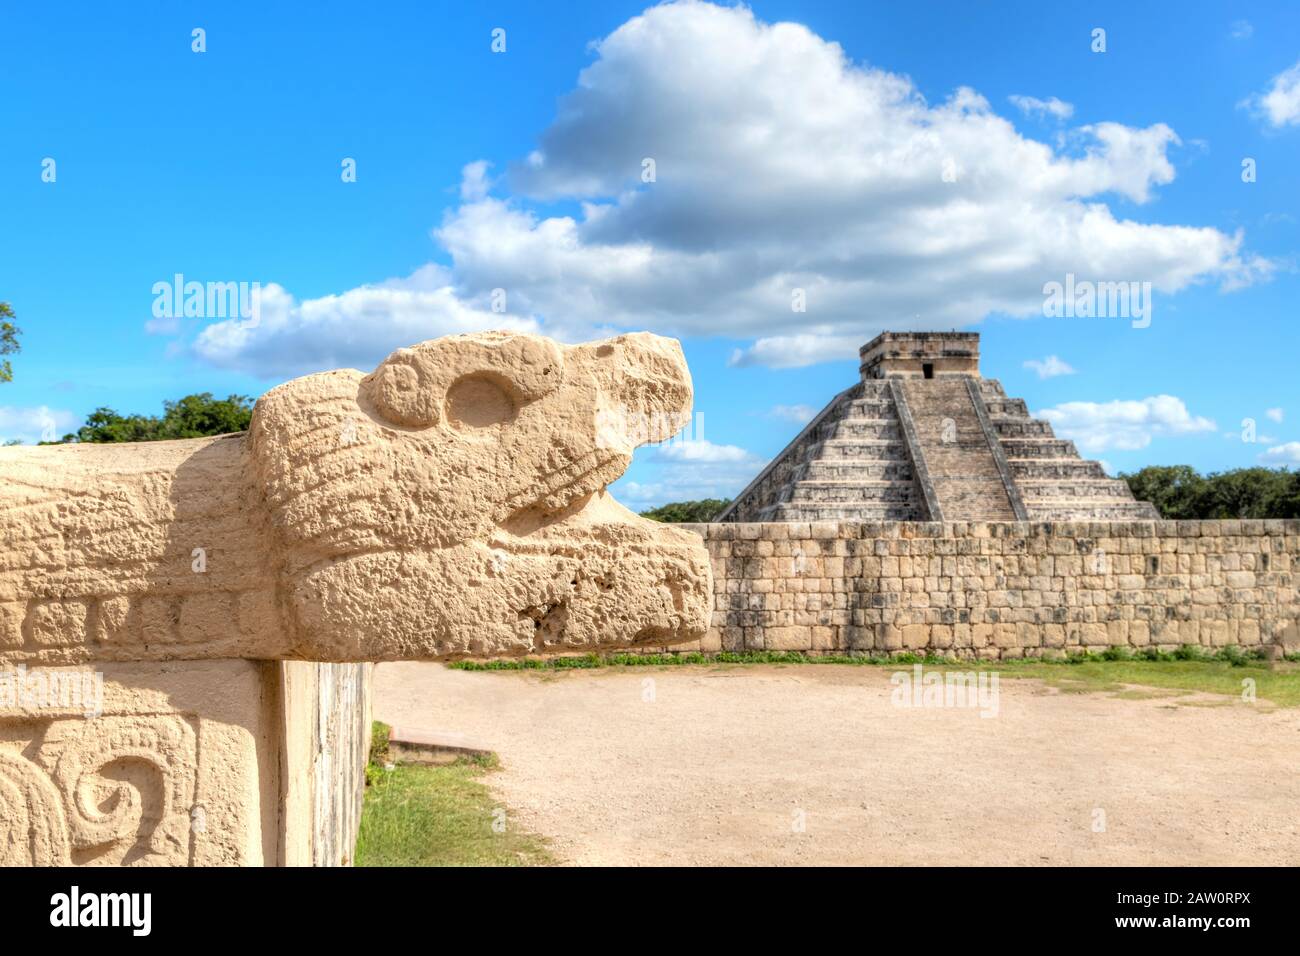 Centuries-old Maya snake head sculpture and Temple of Kukulcan Pyramid at Chichen Itza in the Yucatan Peninsula of Mexico. A World Heritage Site, it i Stock Photo